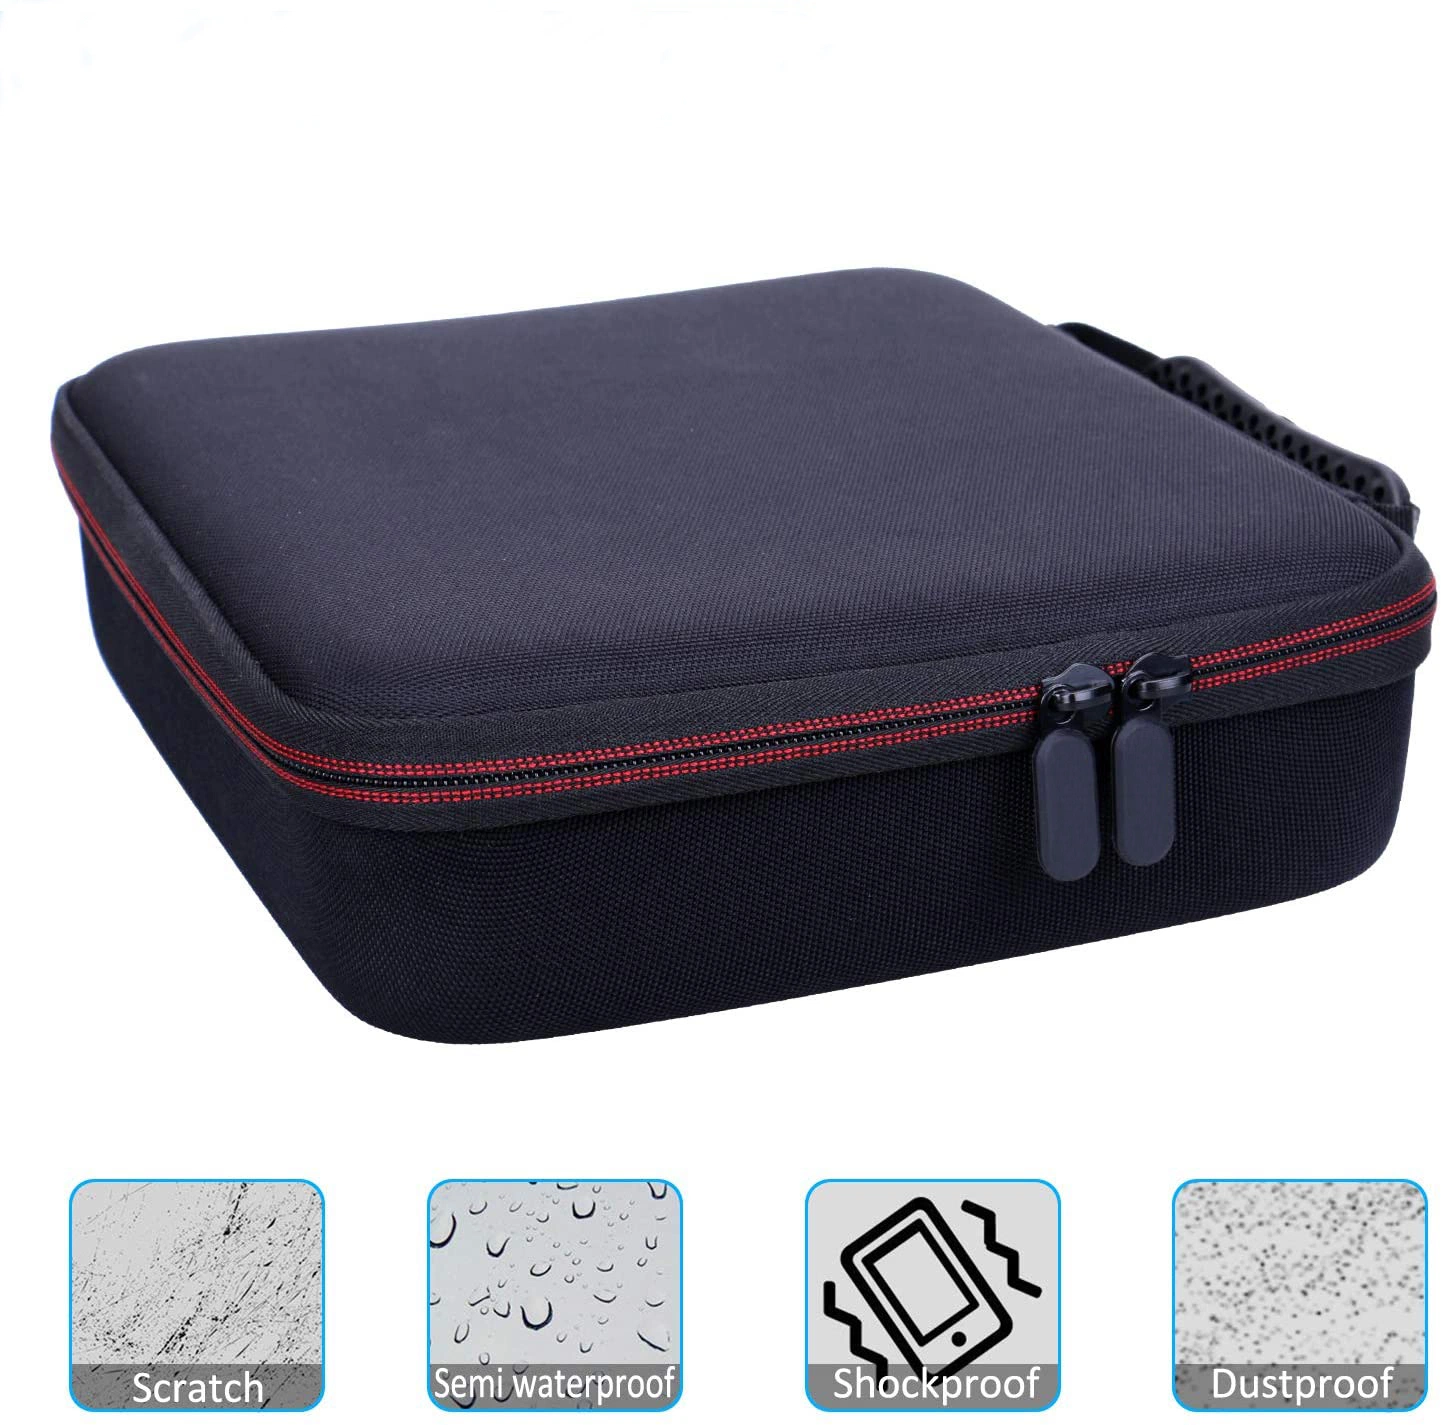 Protective Carrying Zipper Travel Waterproof Shockproof Smell Proof Nylon Tools EVA Storage Box Pouch Packing EVA Bags Case for Hard Drive